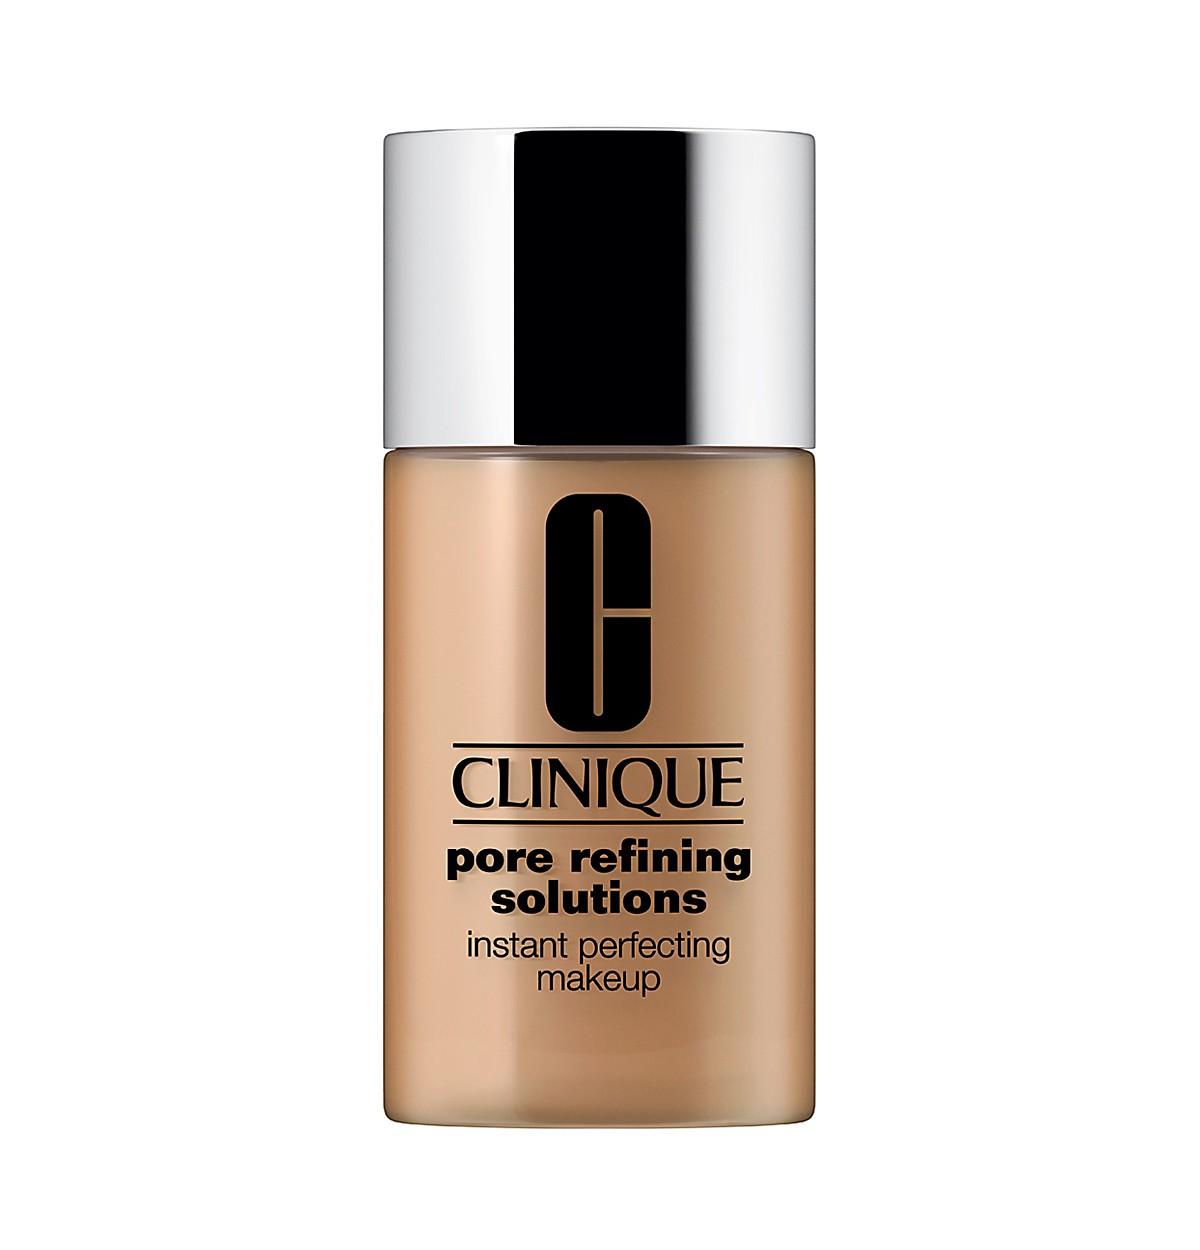 Foto Mujer Maquillaje Clinique Pore Refining Solutions Instant Perfecting foto 762765